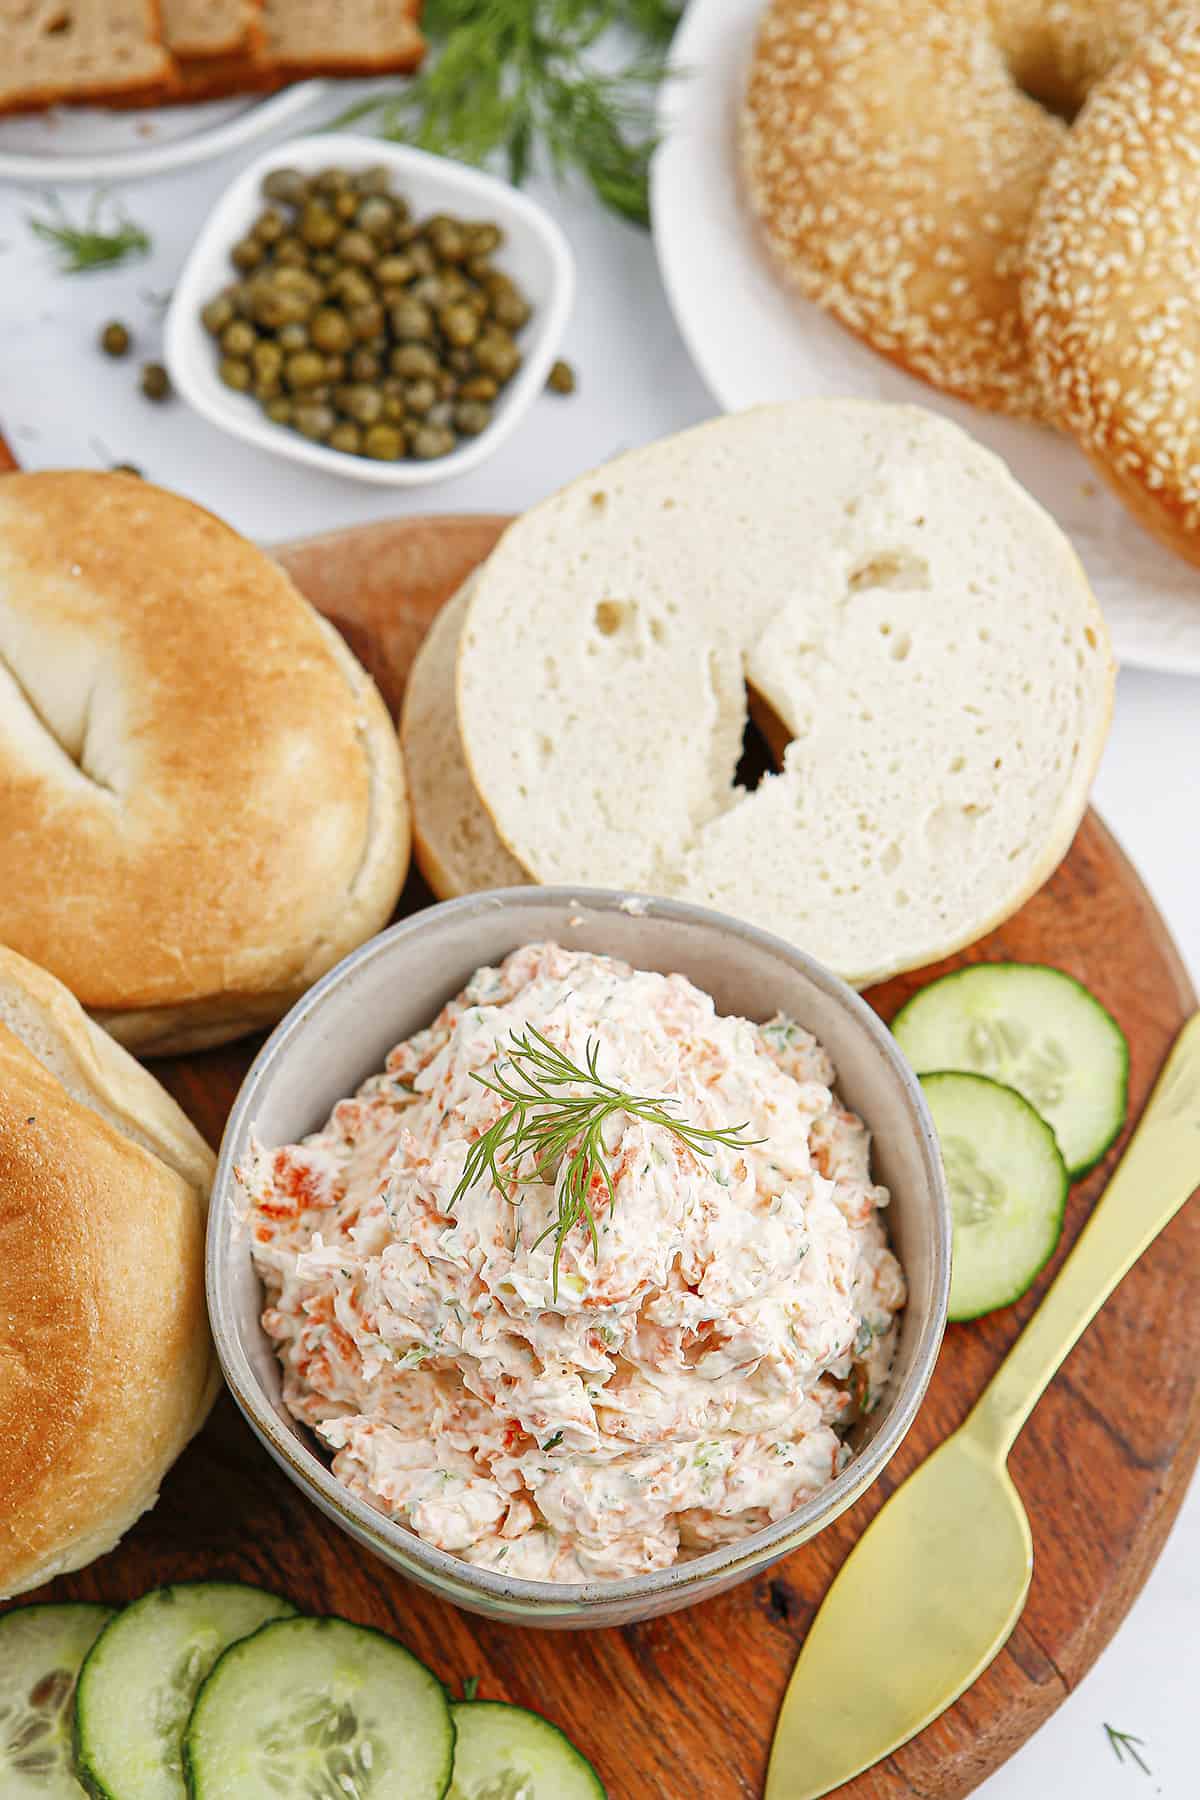 Smoked salmon cream cheese in bowl surrounded by bagels.